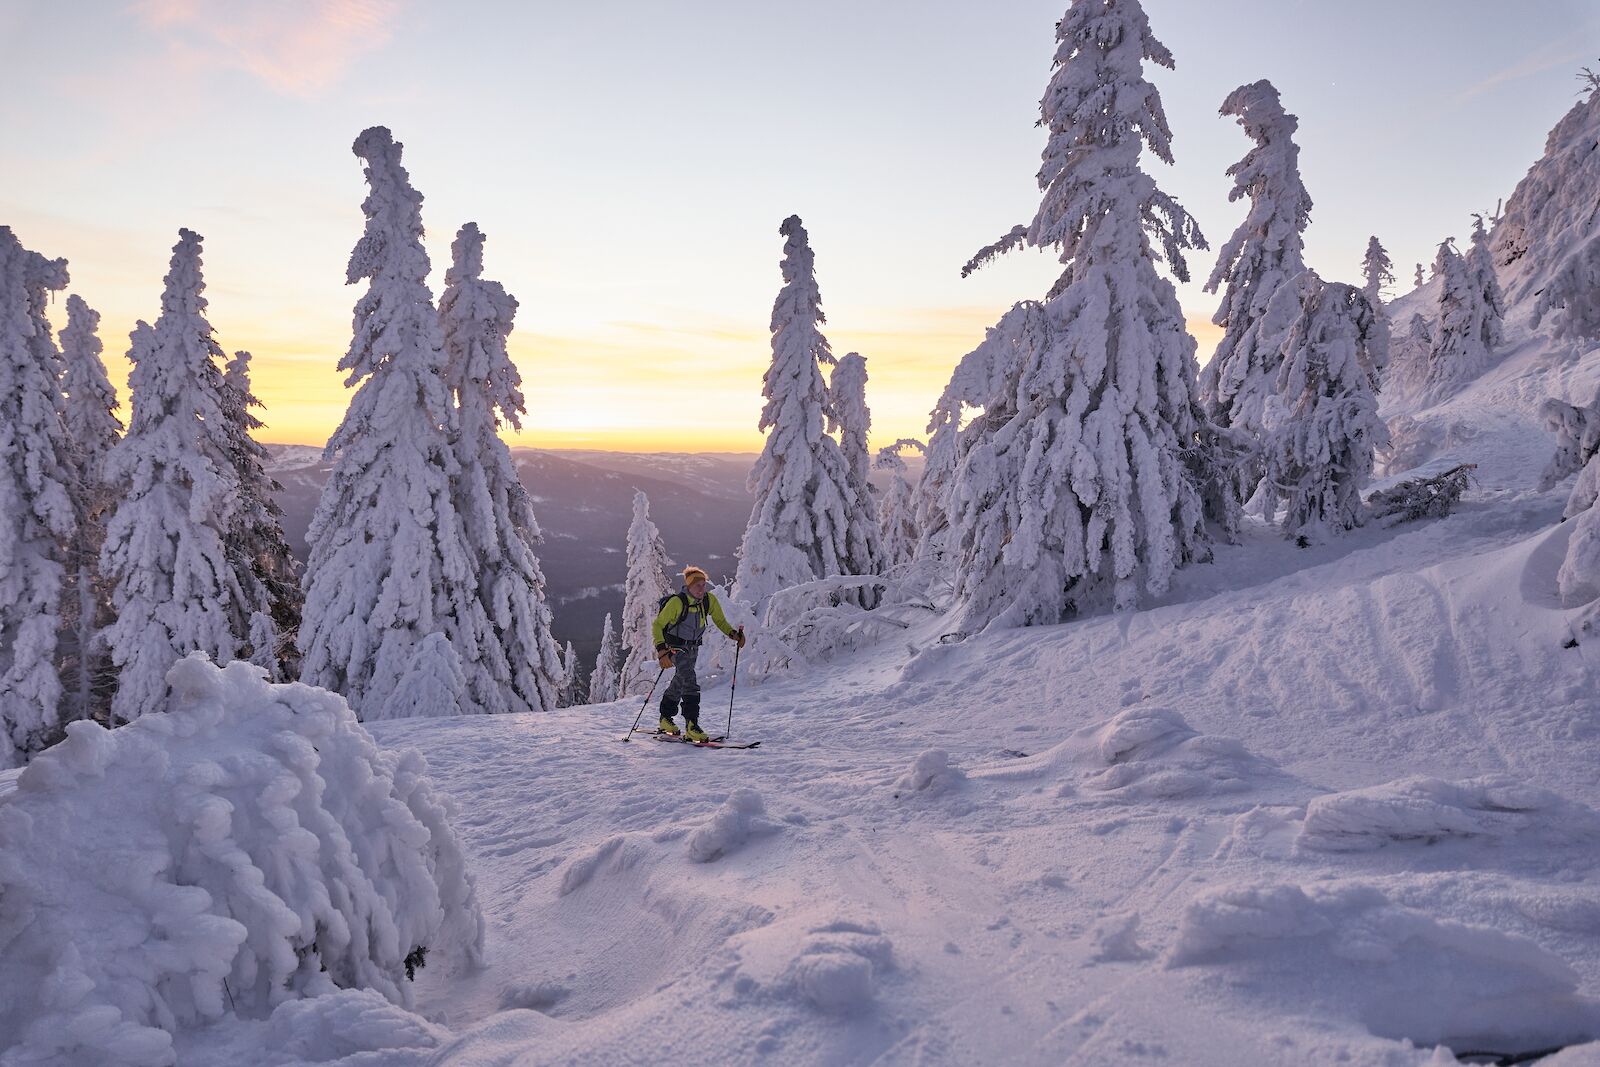 Ski touring is popular in the many hills of the Bavarian Forest, shown here